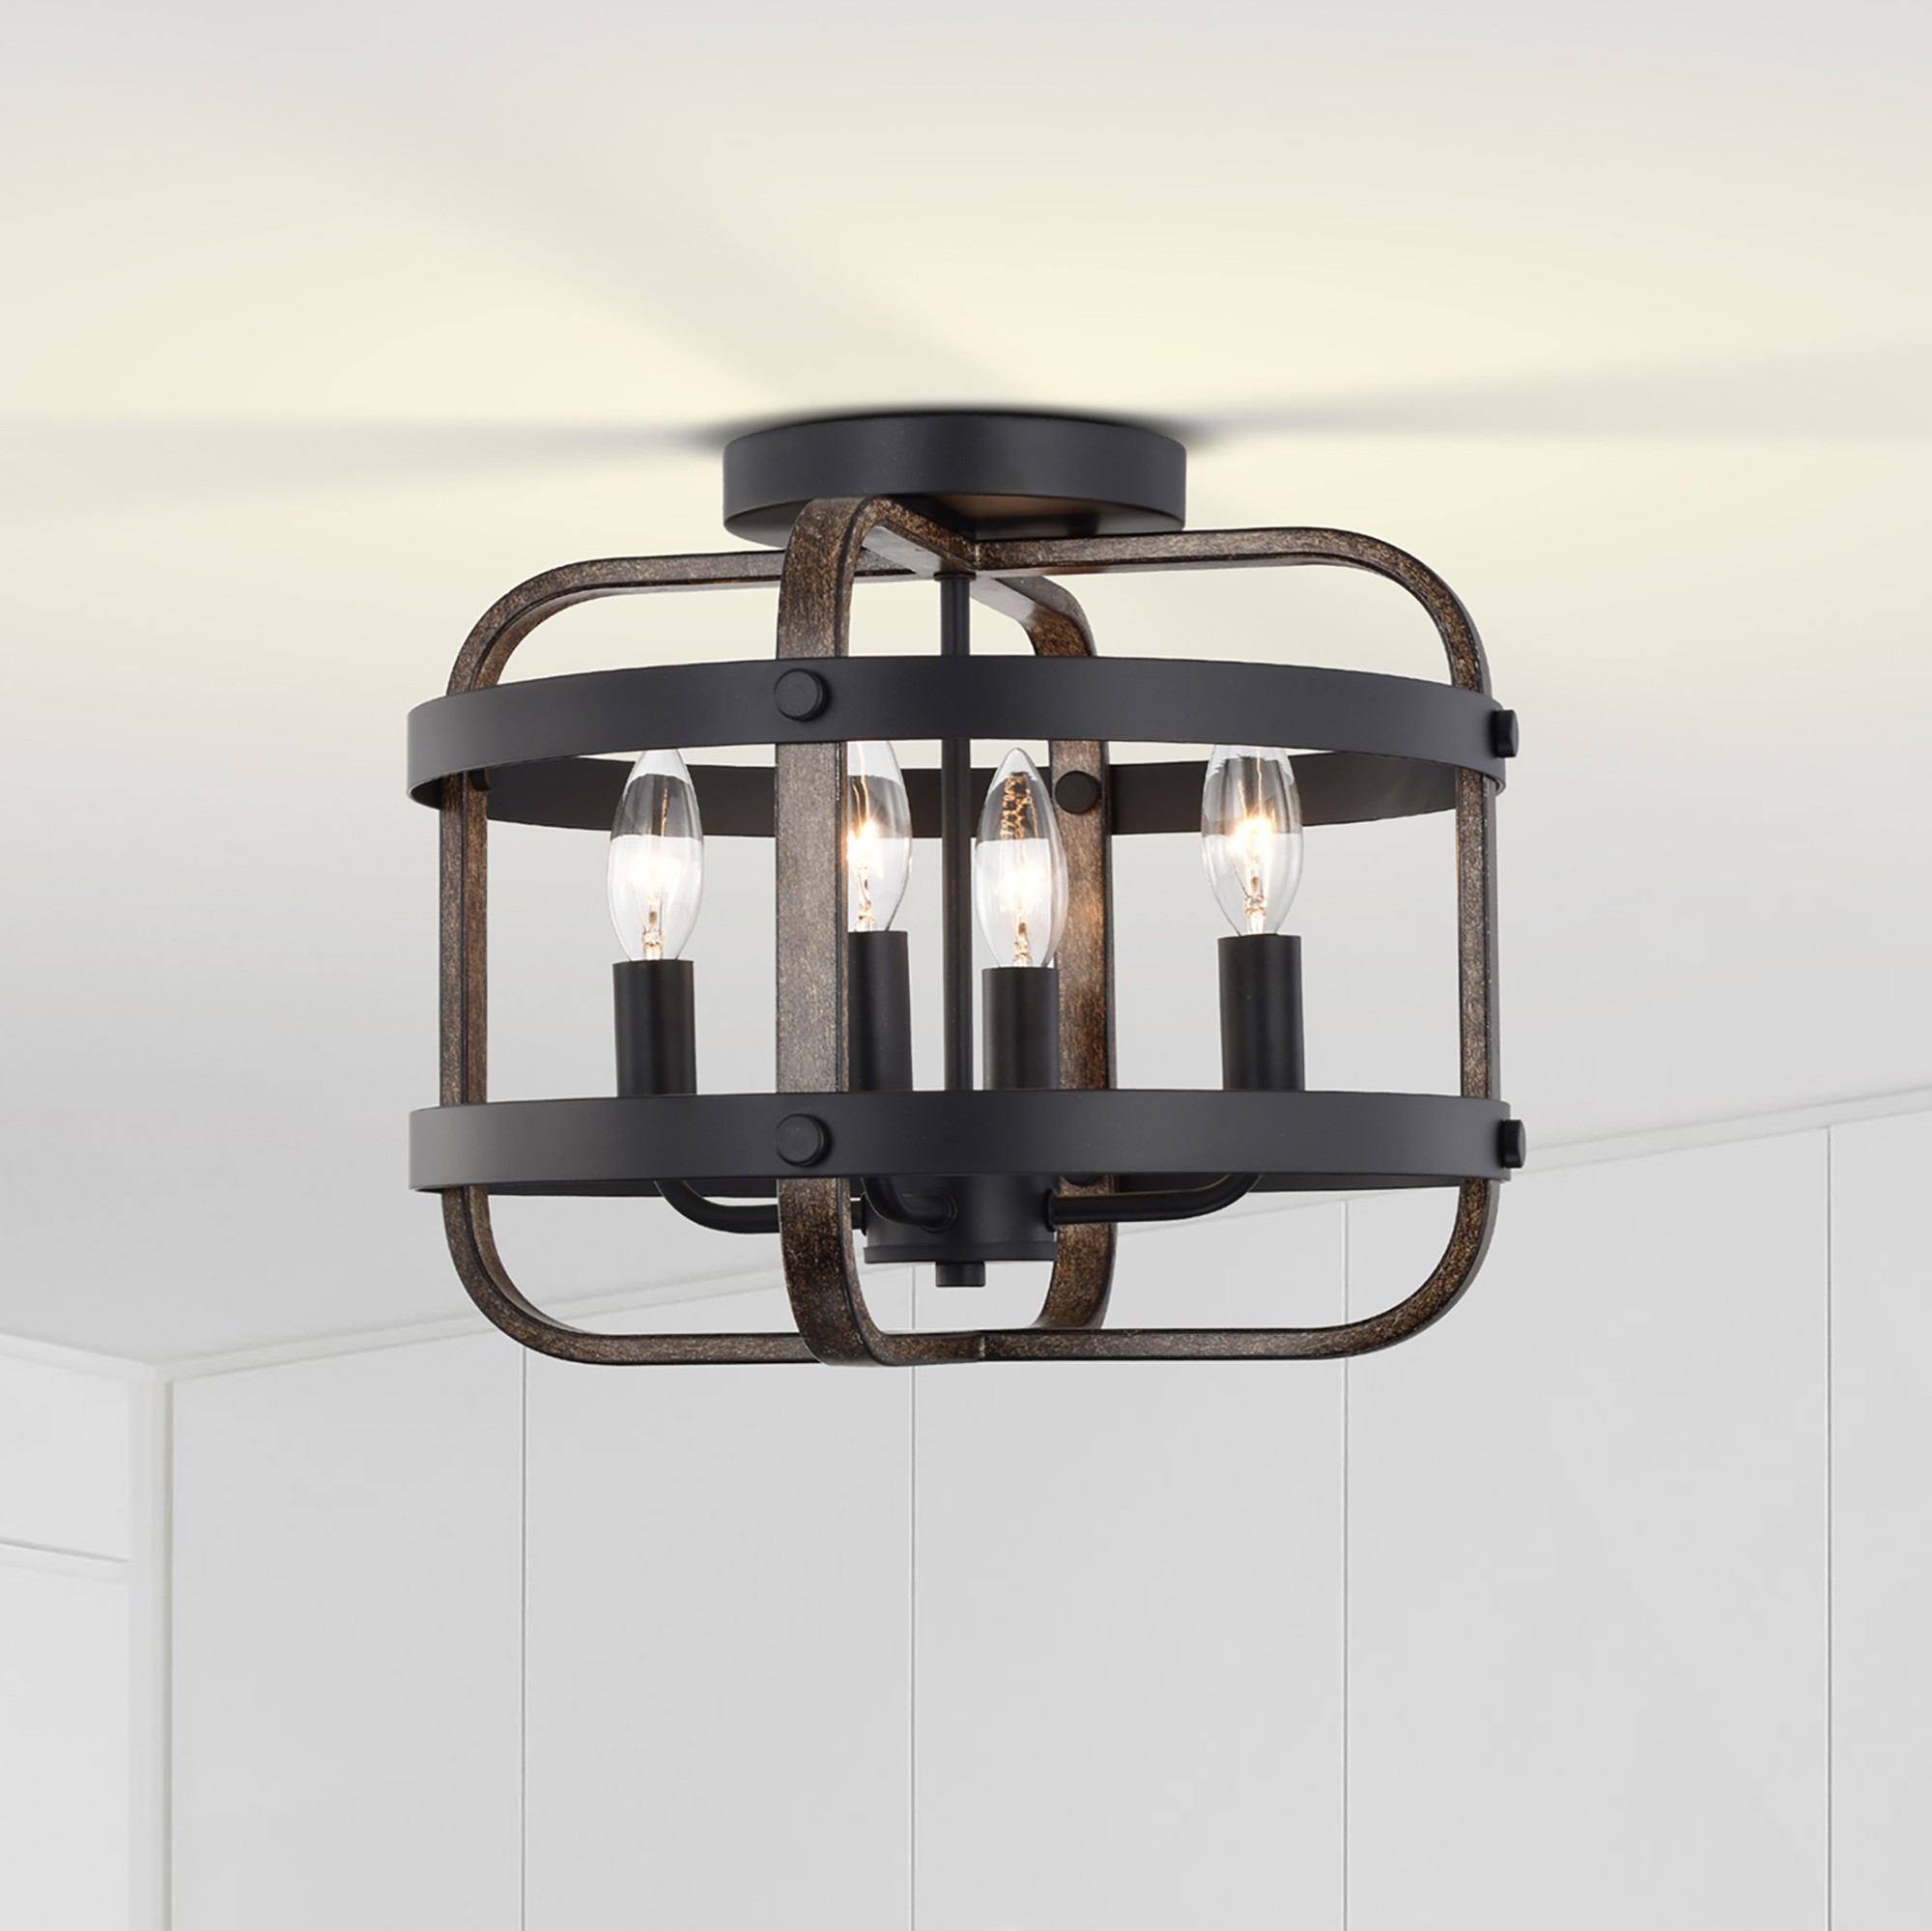 Juno 14 in. 4-Light Indoor Brown and Matte Black Finish Semi-Flush Mount Ceiling Light with Light Kit and Remote